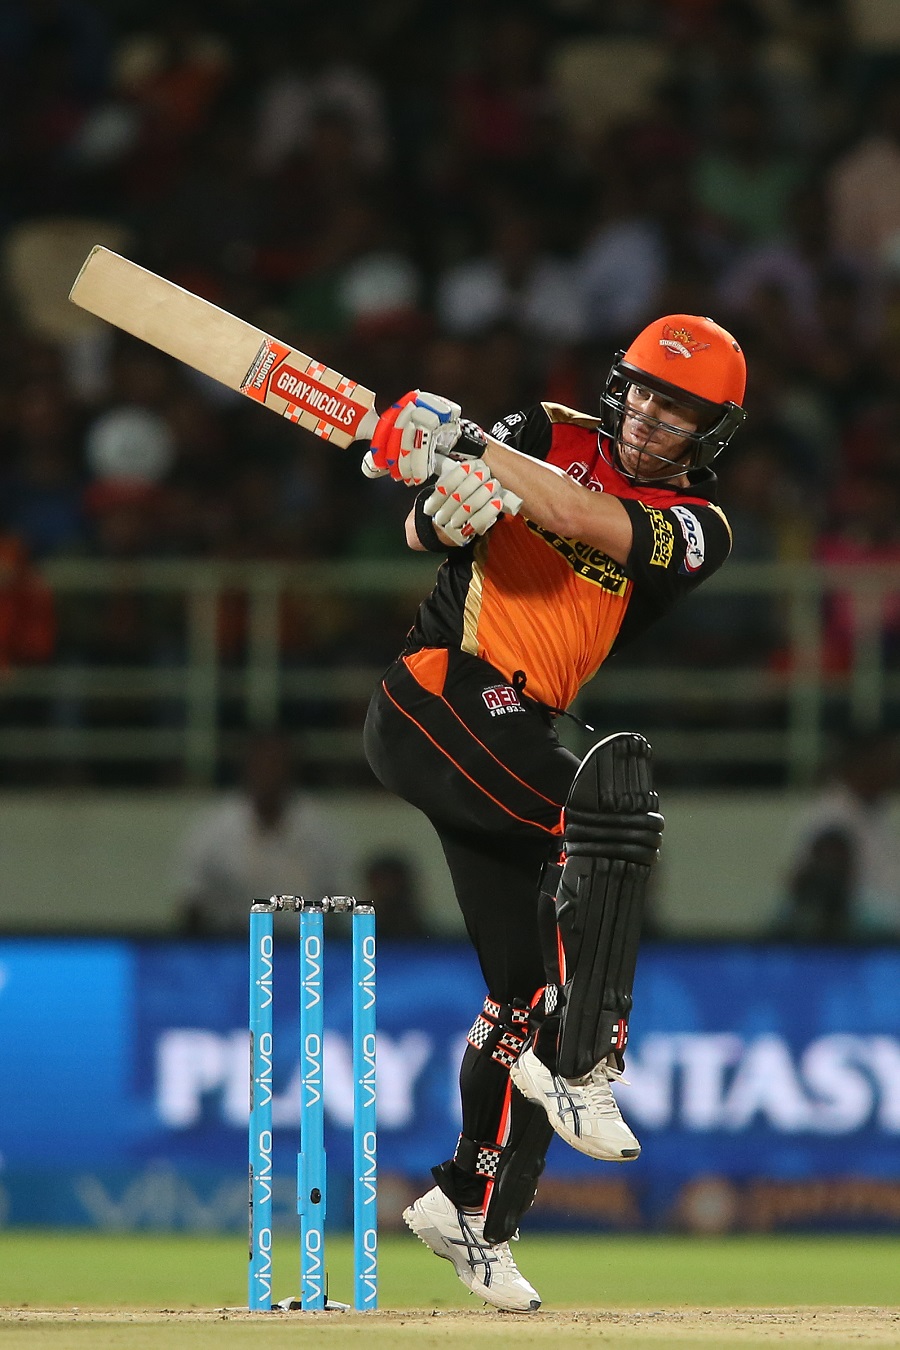 Sunrisers Hyderabad captain David Warner pulls a delivery to the leg side during match 40 of the Vivo IPL 2016 (Indian Premier League) between Rising Pune Supergiants and Sunrisers Hyderabad held at the ACA-VDCA Stadium, Visakhapatnam on Tuesday.